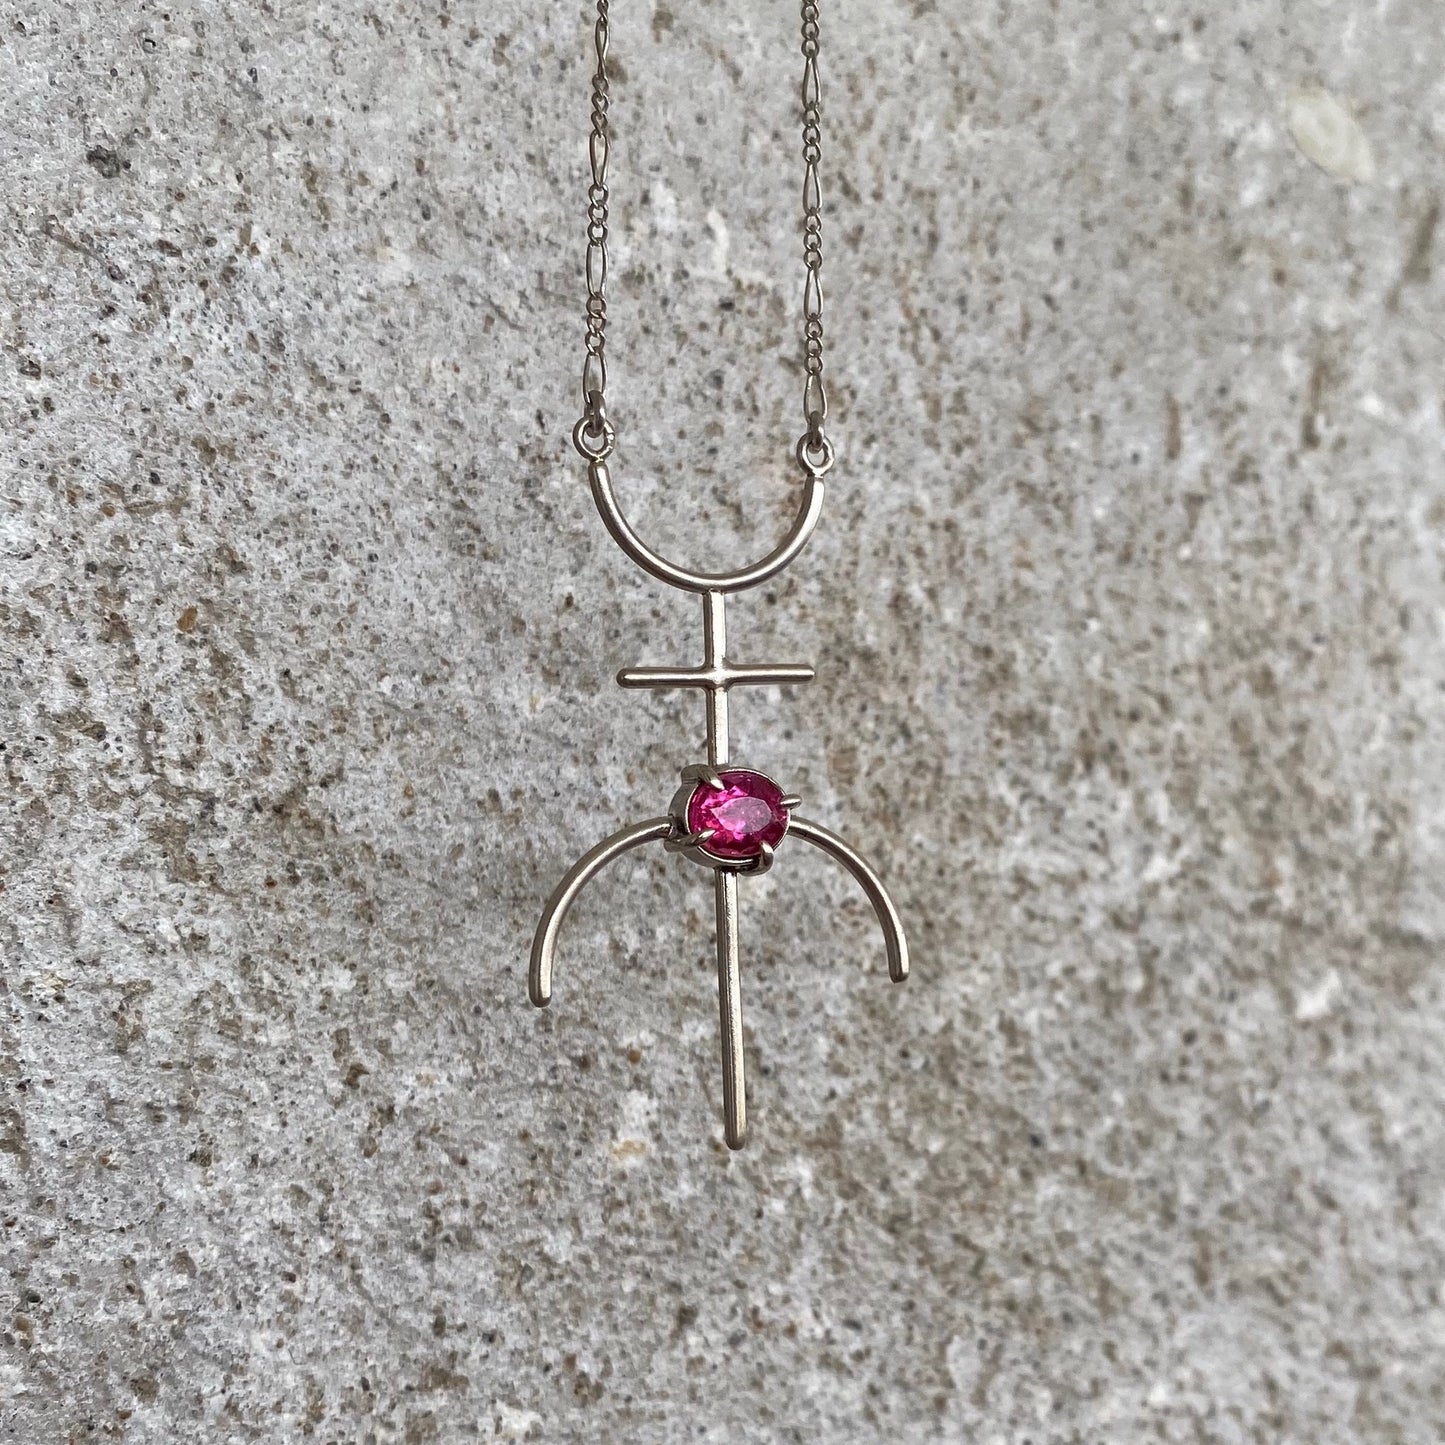 ASTROS SYMBOLS sterling silver and pink Tourmaline necklace I